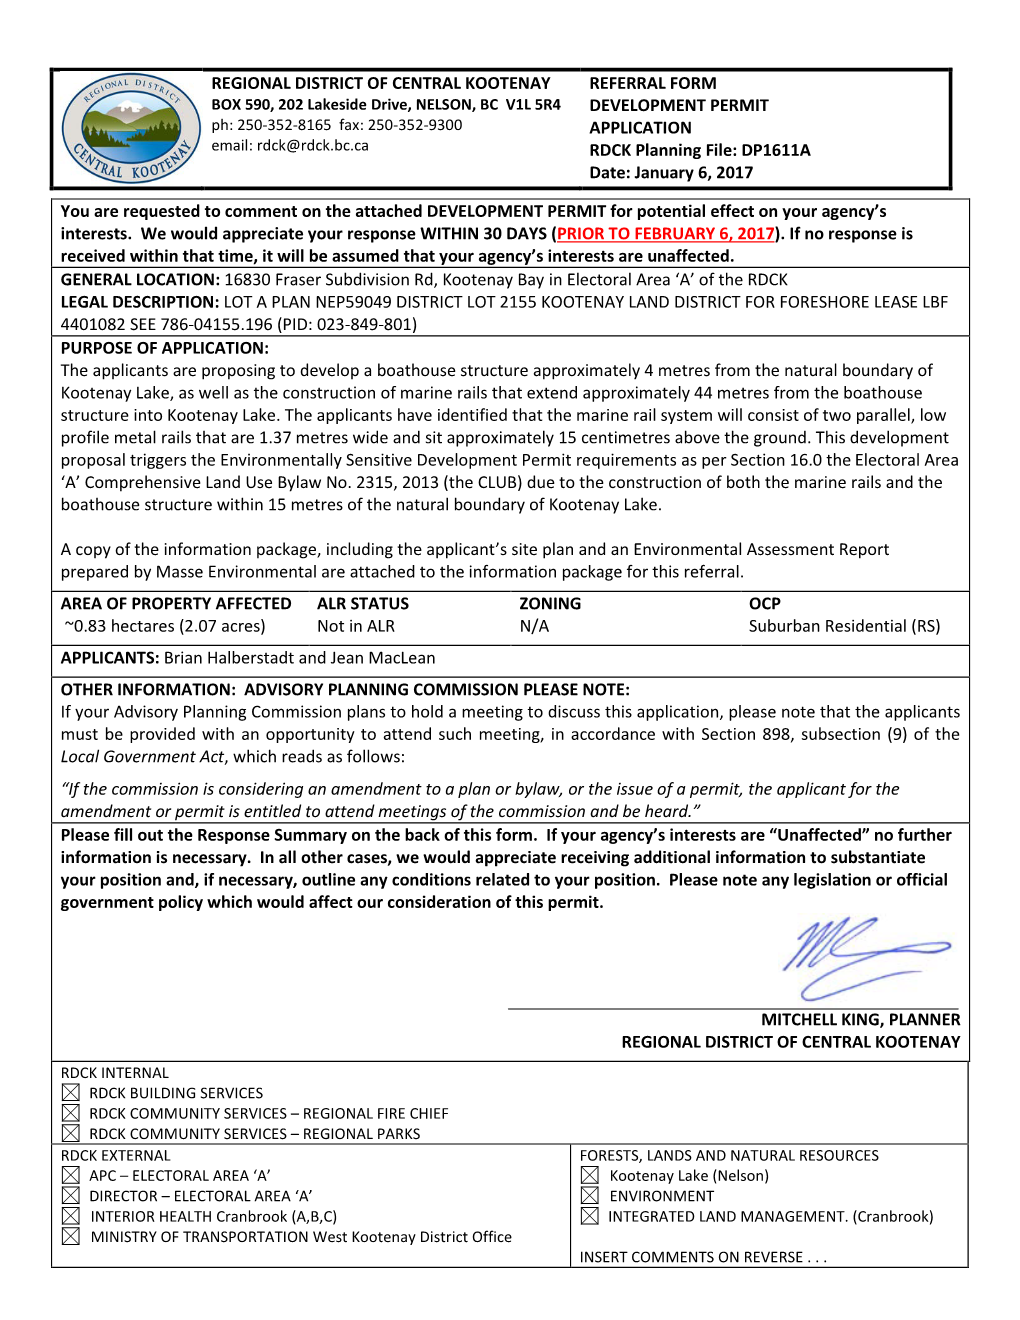 REGIONAL DISTRICT of CENTRAL KOOTENAY REFERRAL FORM DEVELOPMENT PERMIT APPLICATION RDCK Planning File: DP1611A Date: January 6